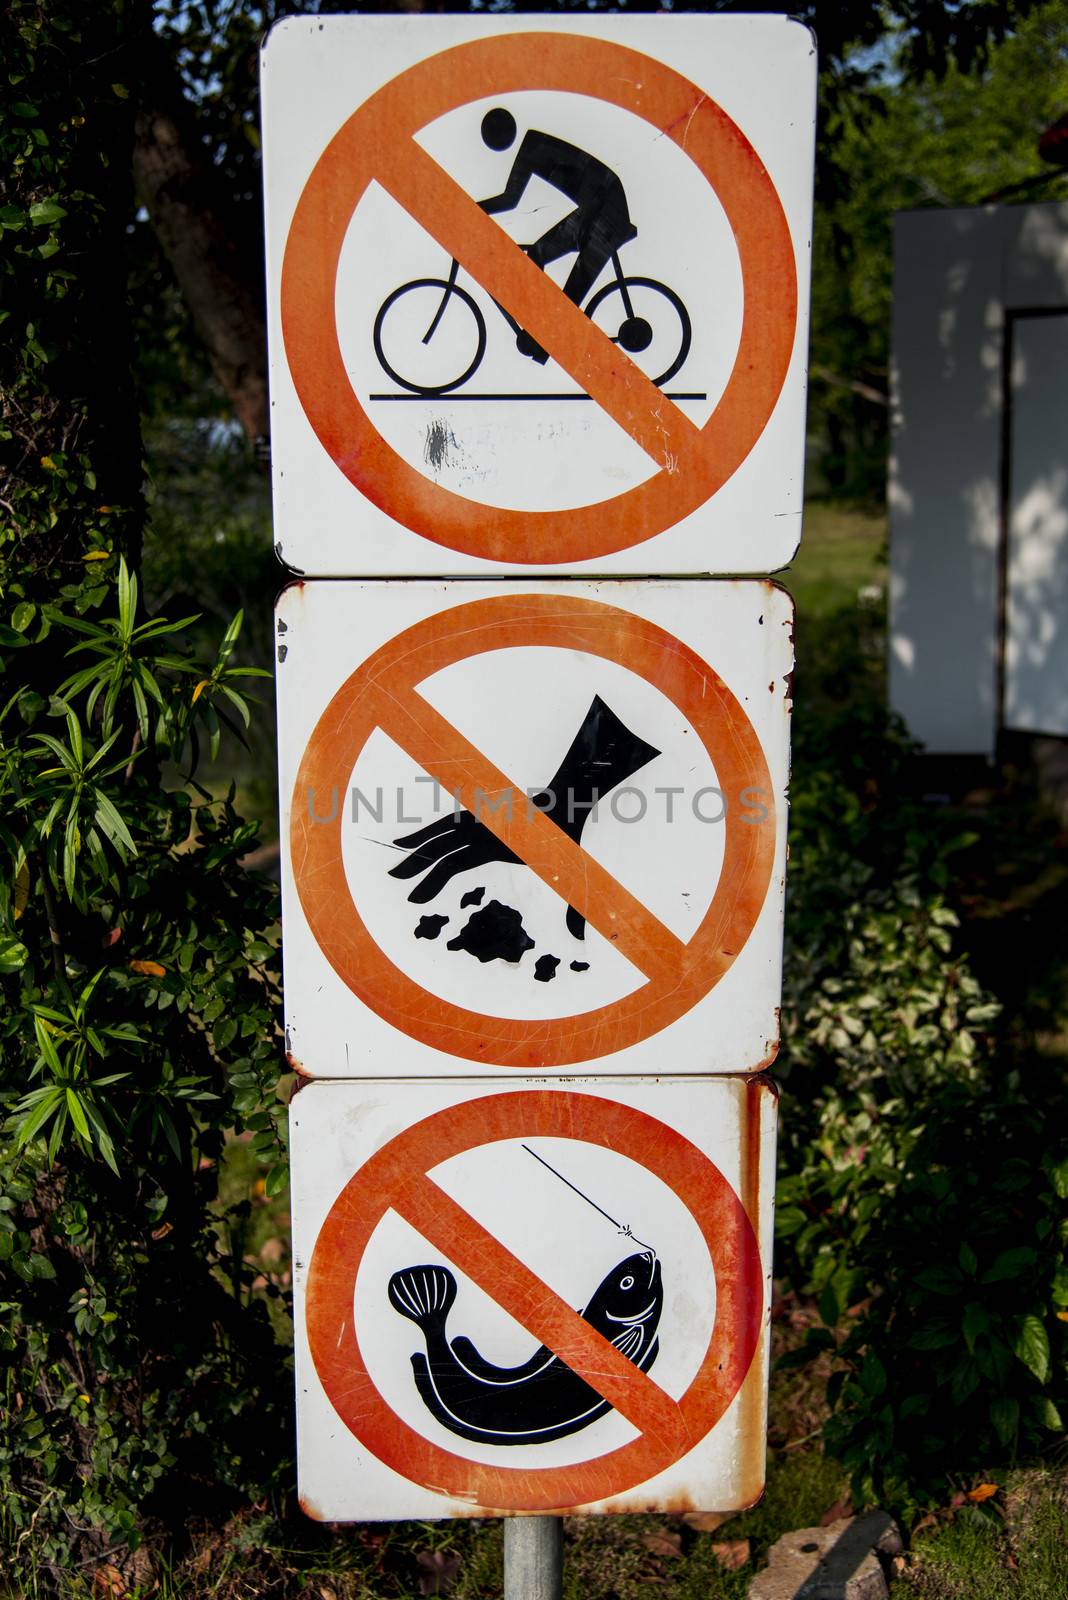 Prohibit sign in the park